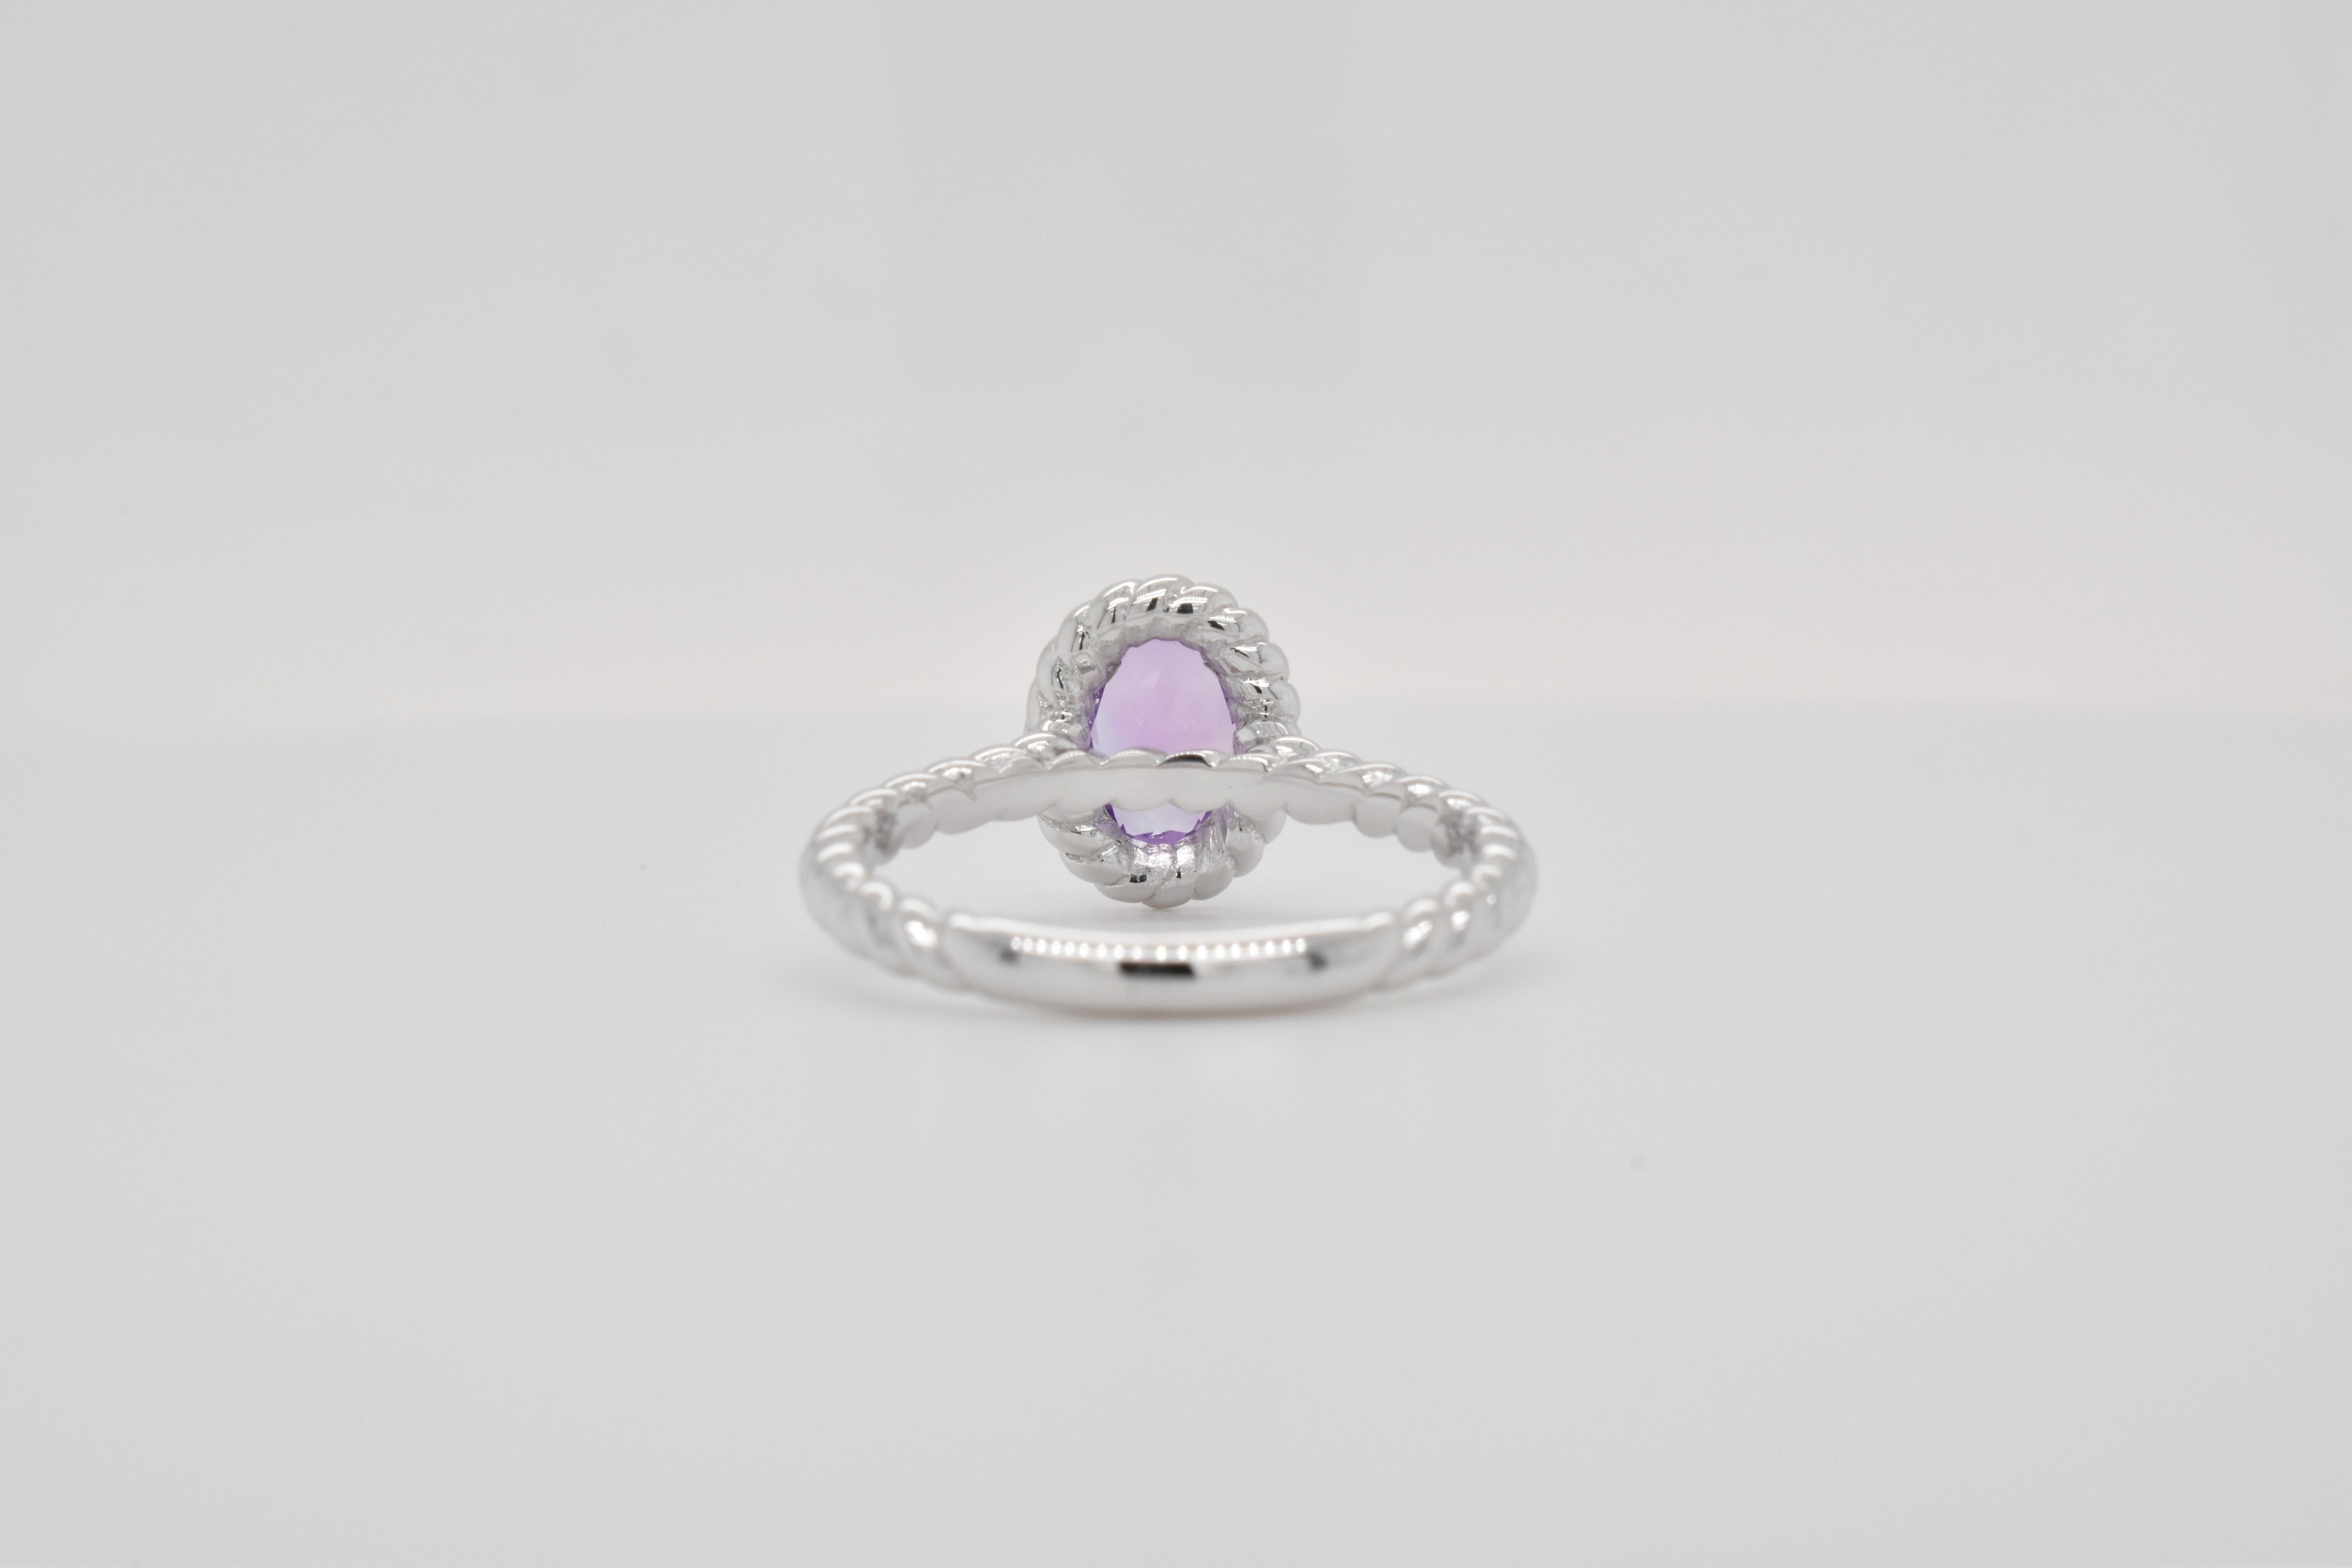 Oval Shape Amethyst Gemstone  beautifully crafted  in a Ring. A fiery Violet Color February Birthstone. For a special occasion like Engagement or Proposal or may be as a gift for a special person.

Primary Stone Size - 7x5 mm